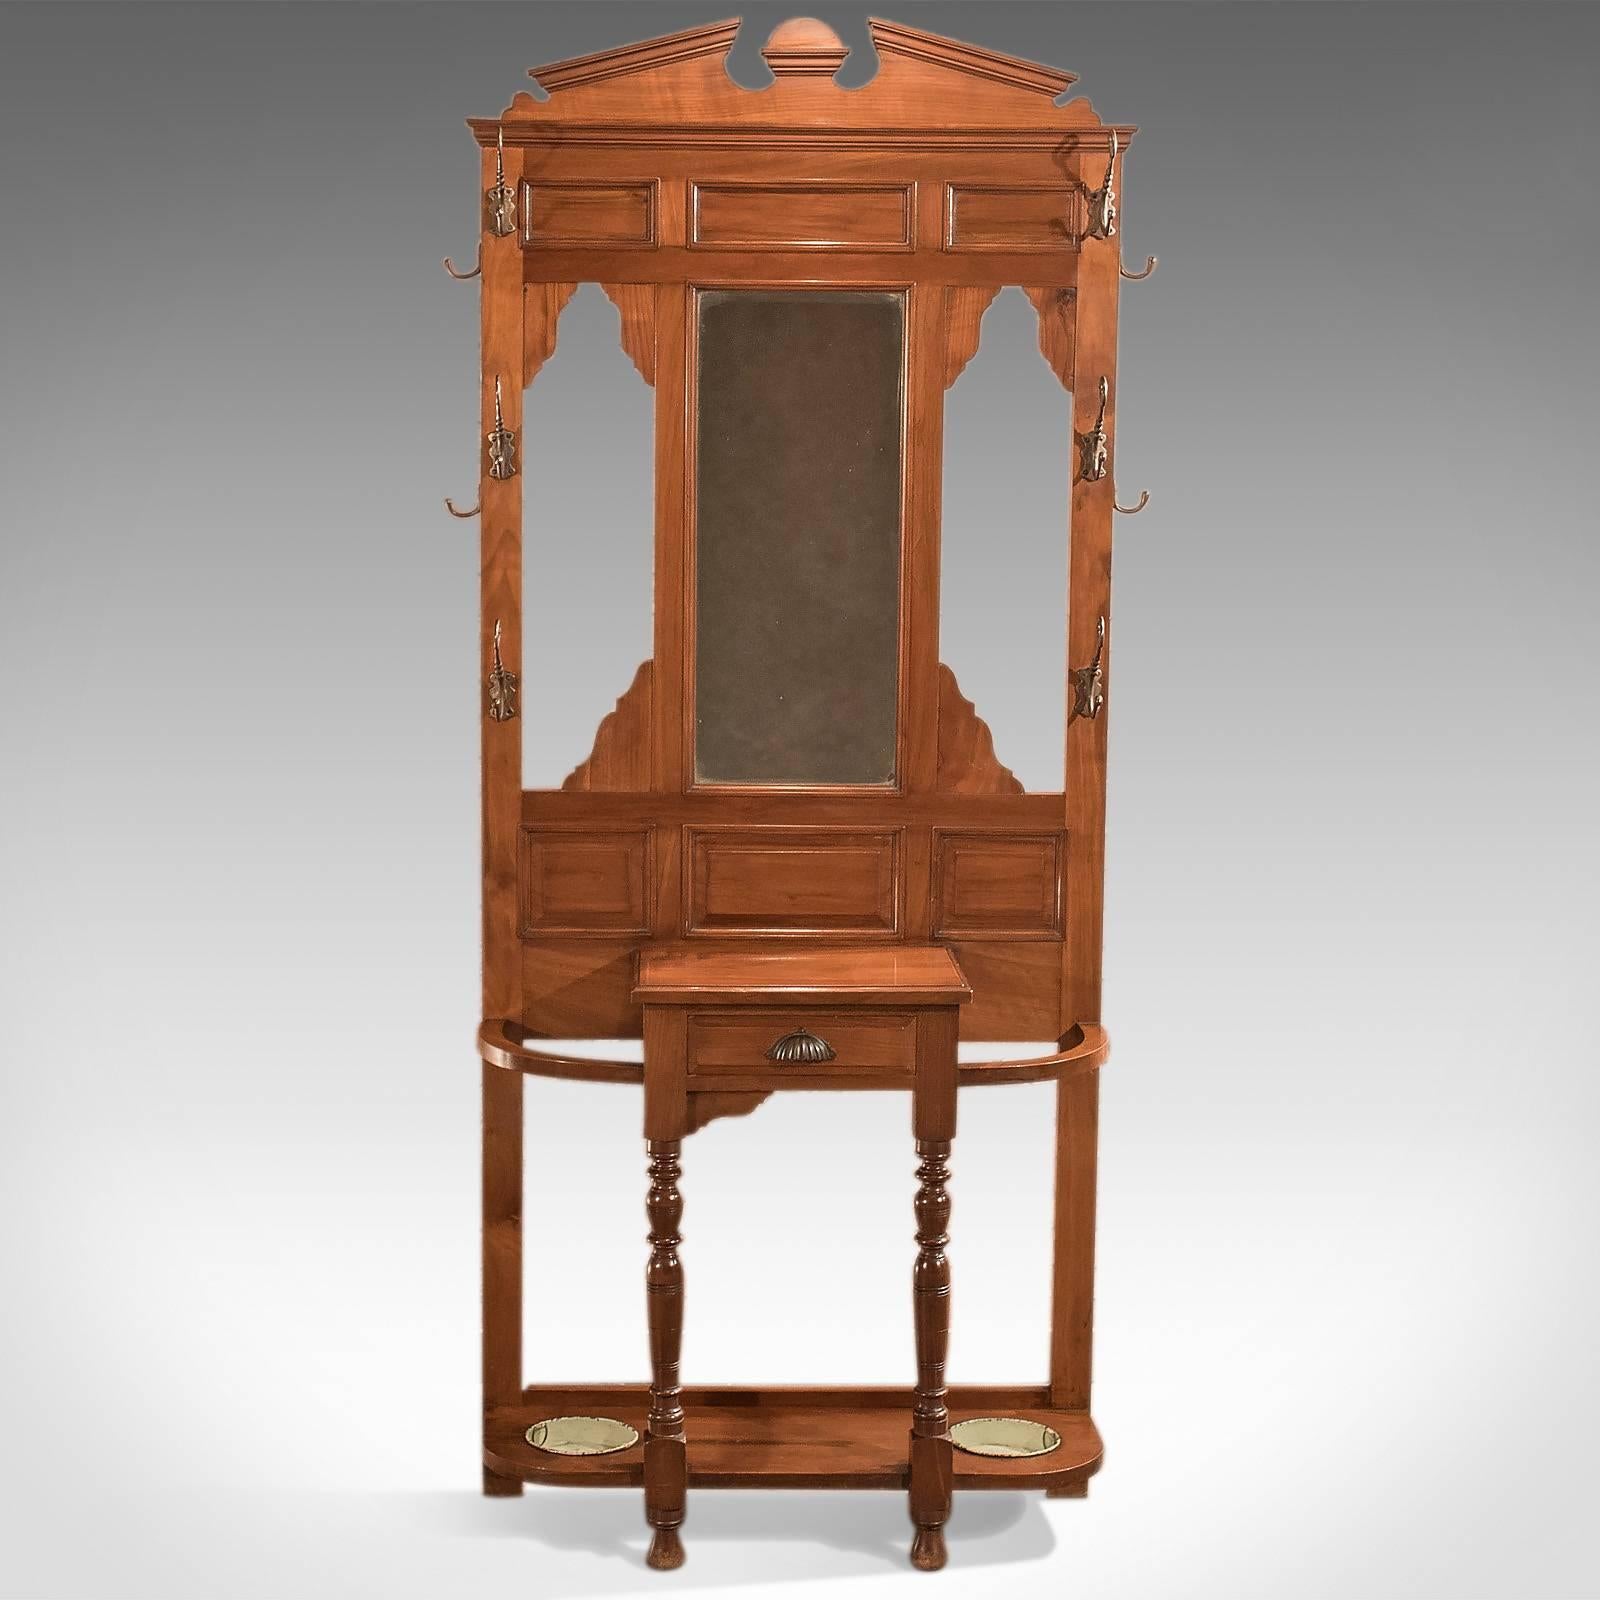 A handsome antique hall stand dating to the Edwardian period at the start of the 20th century, circa 1910.

Walnut with russet tones in a polished finish
Attractive grain detail

Raised on turned front legs
Central drawer dressed with shell